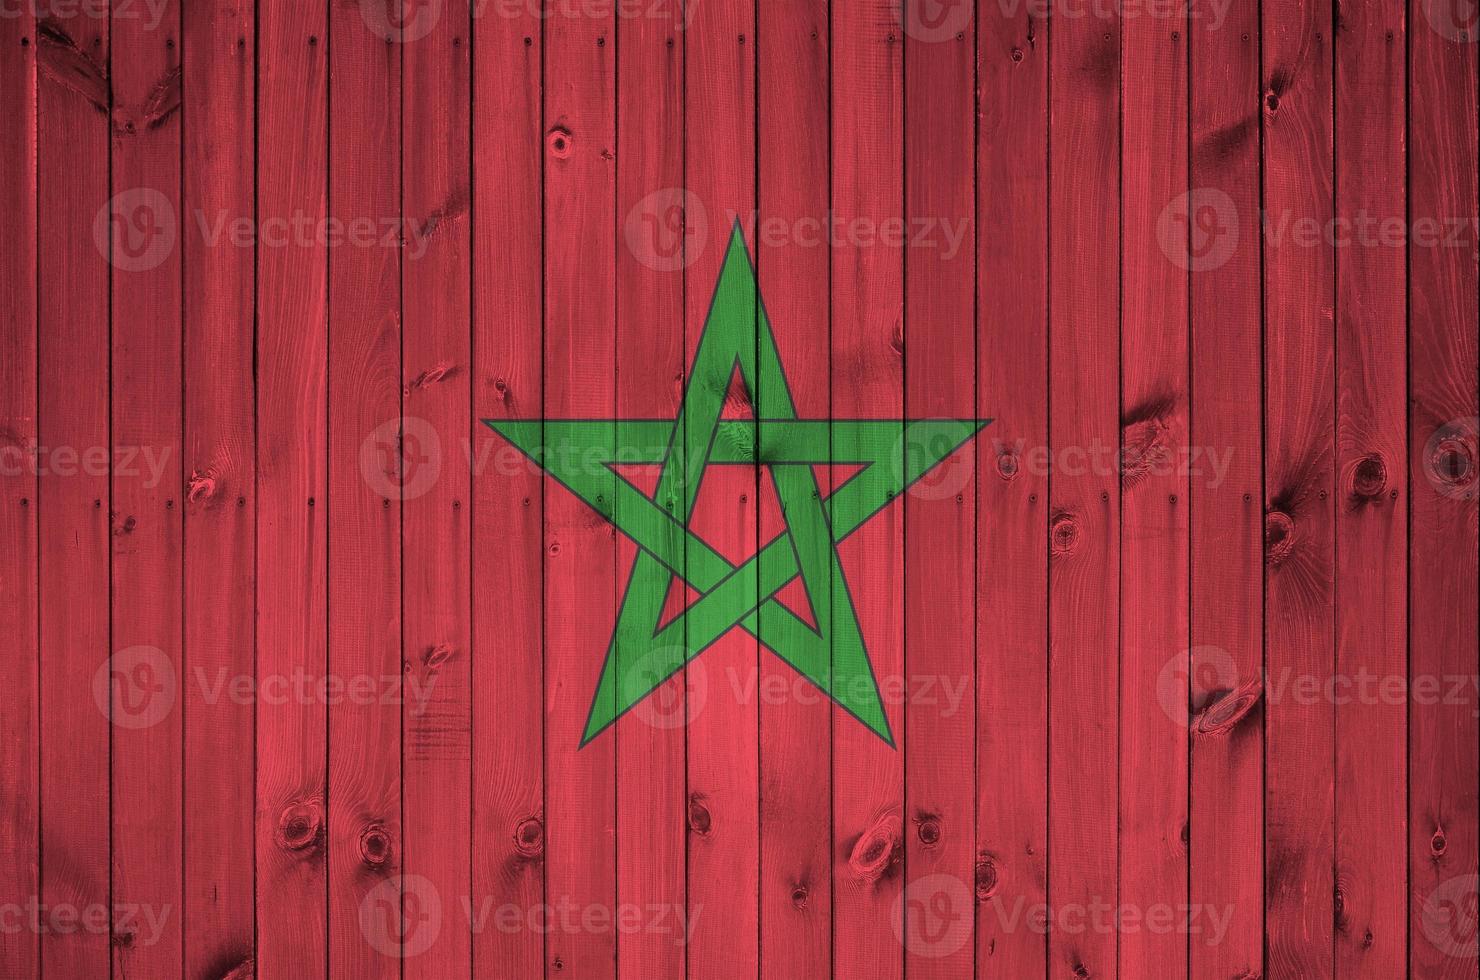 Morocco flag depicted in bright paint colors on old wooden wall. Textured banner on rough background photo